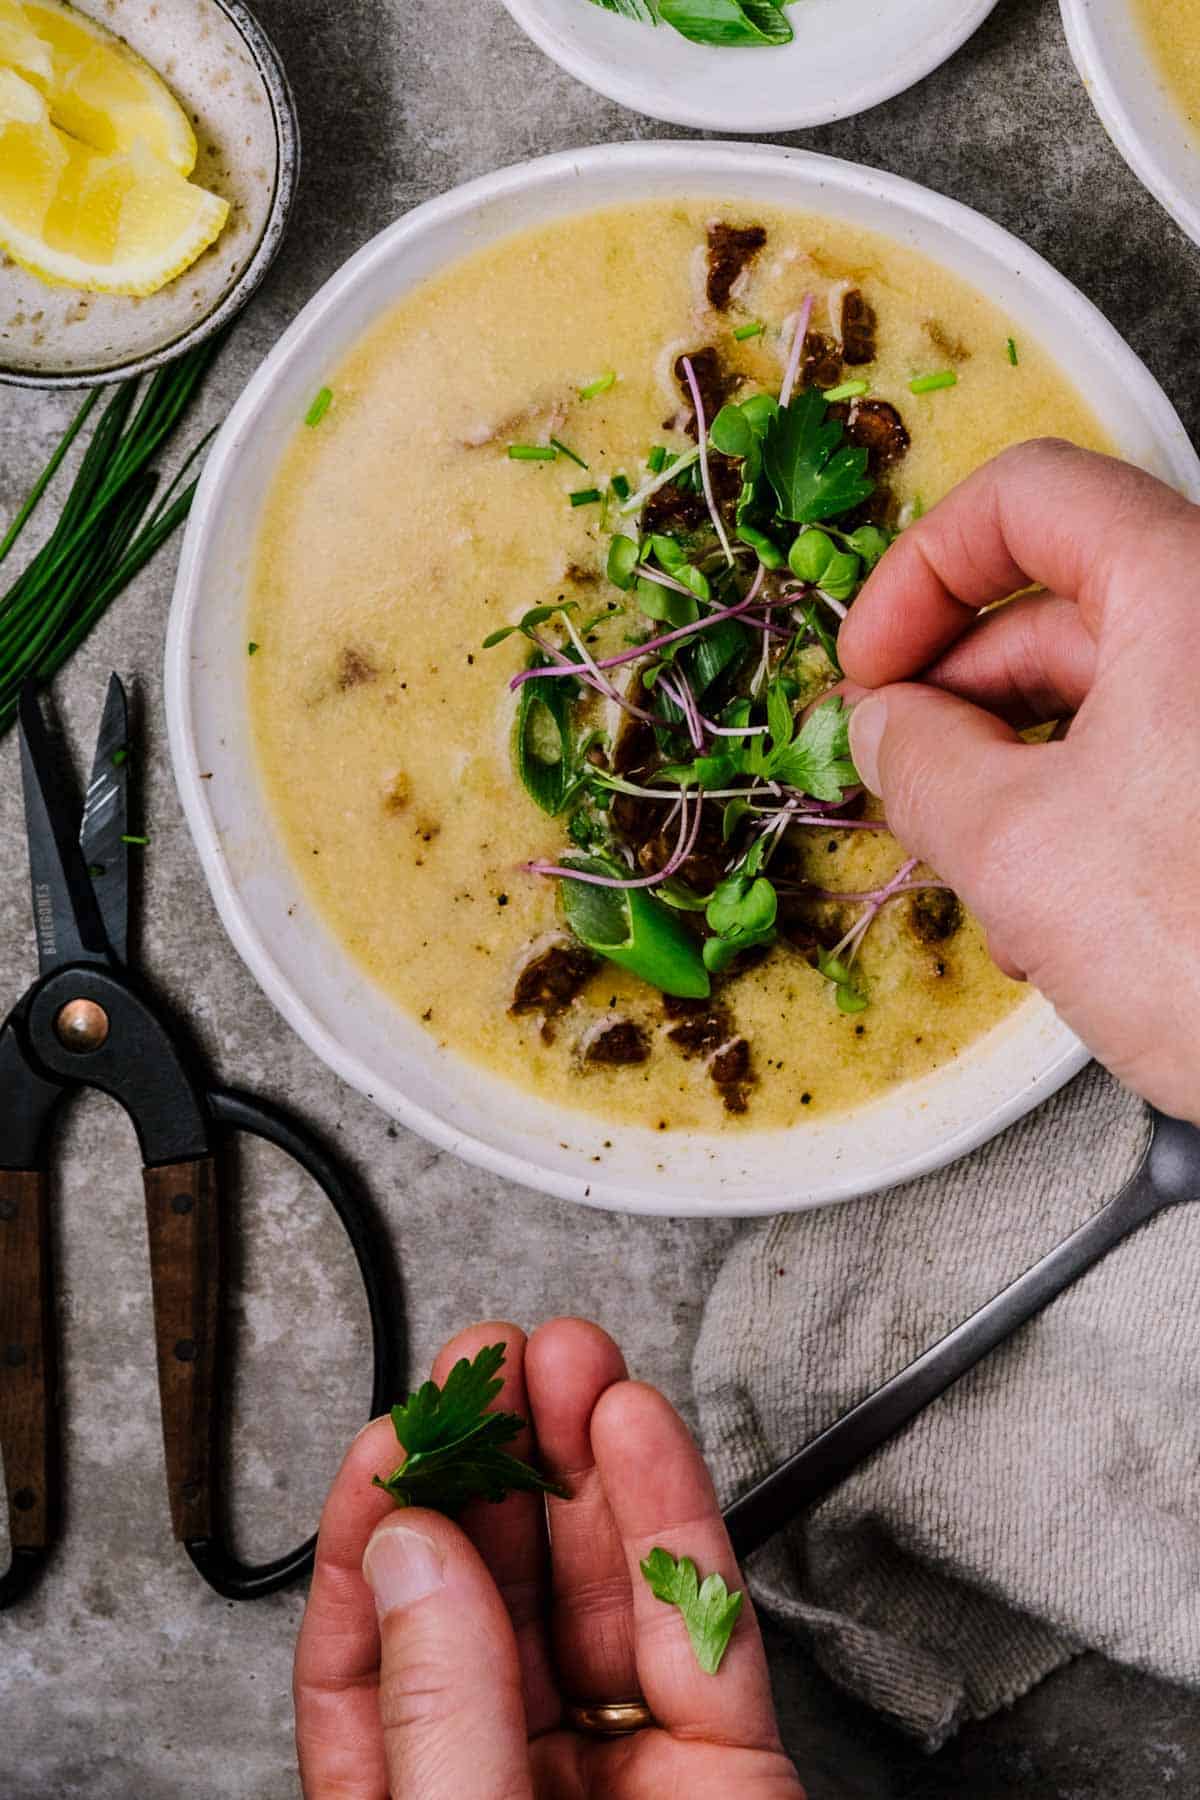 white hand garnishing a bowl of oyster mushroom chowder with herbs. the chowder is a yellow color